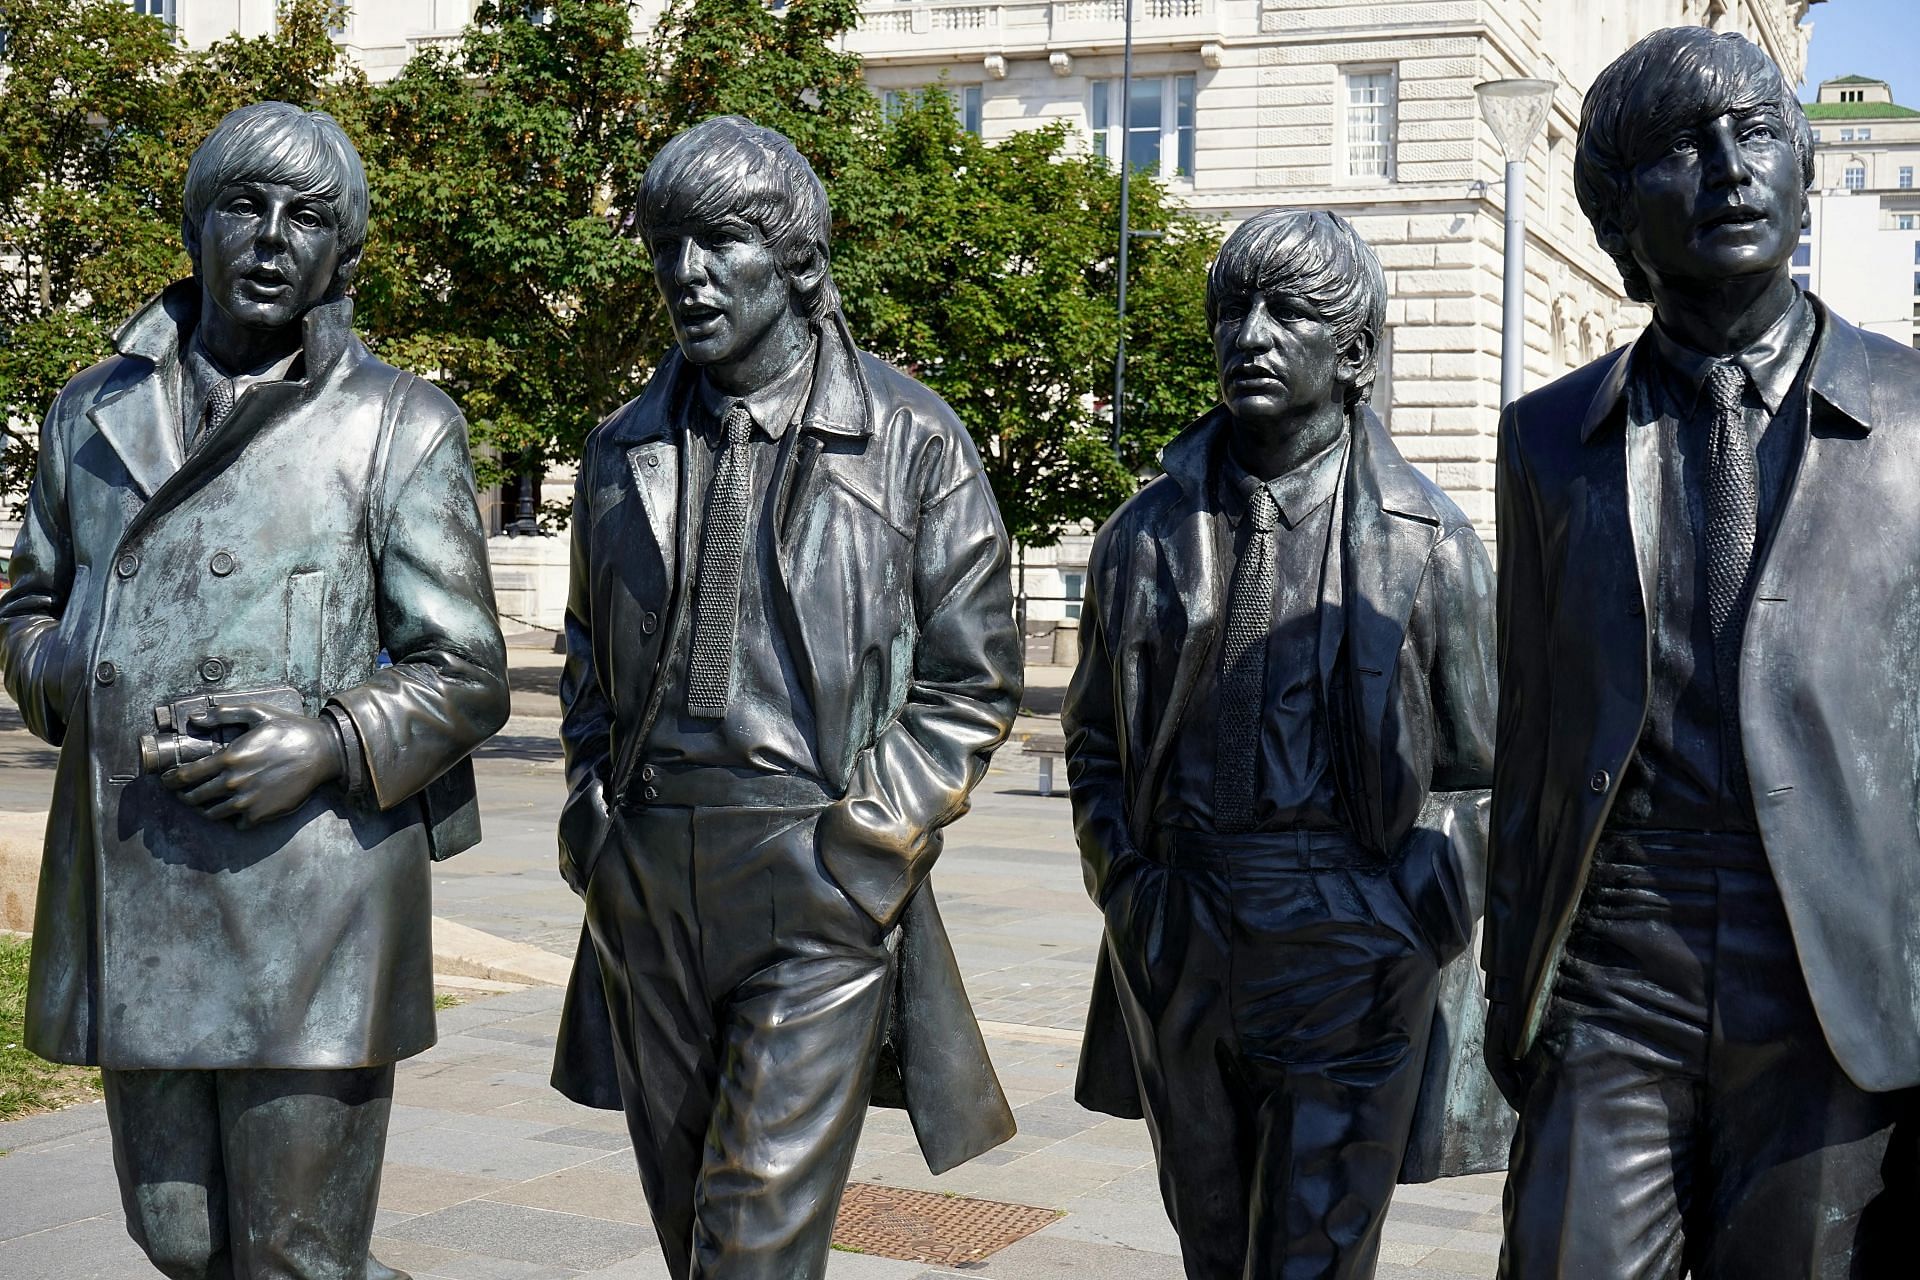 The Beatles remain a legacy beyond just music (Image via Pexels)